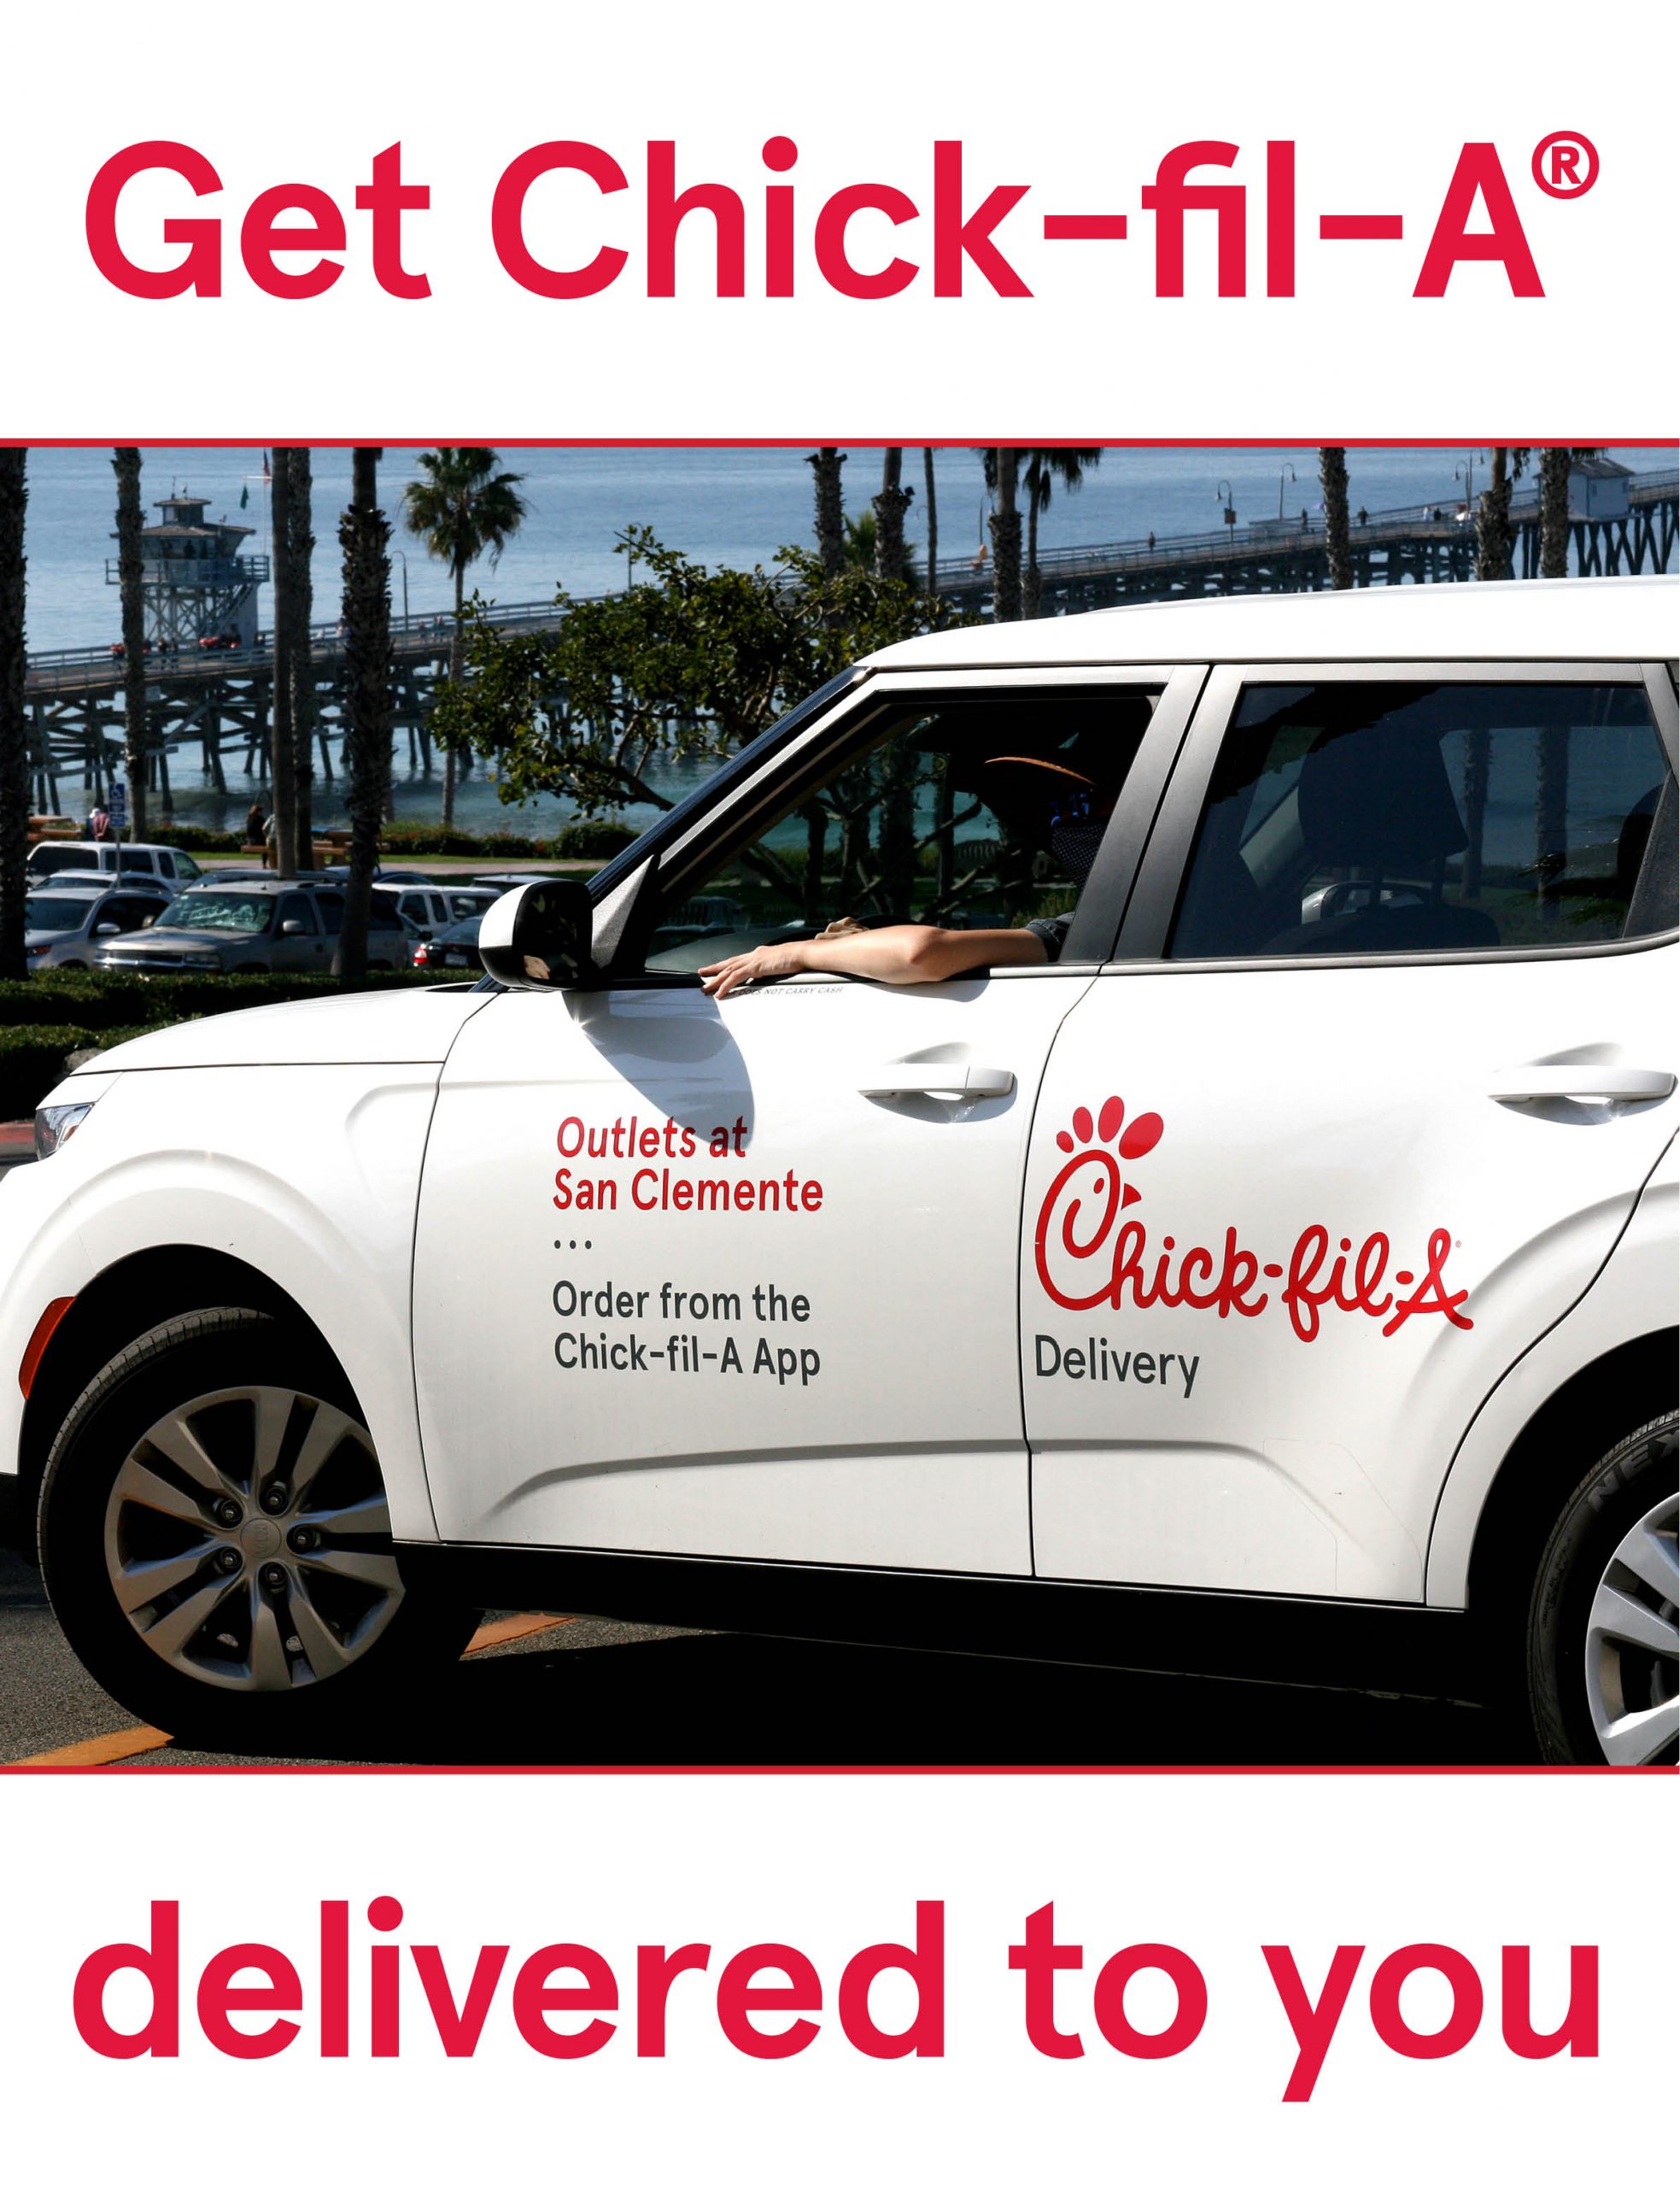 Chick-fil-A Delivery